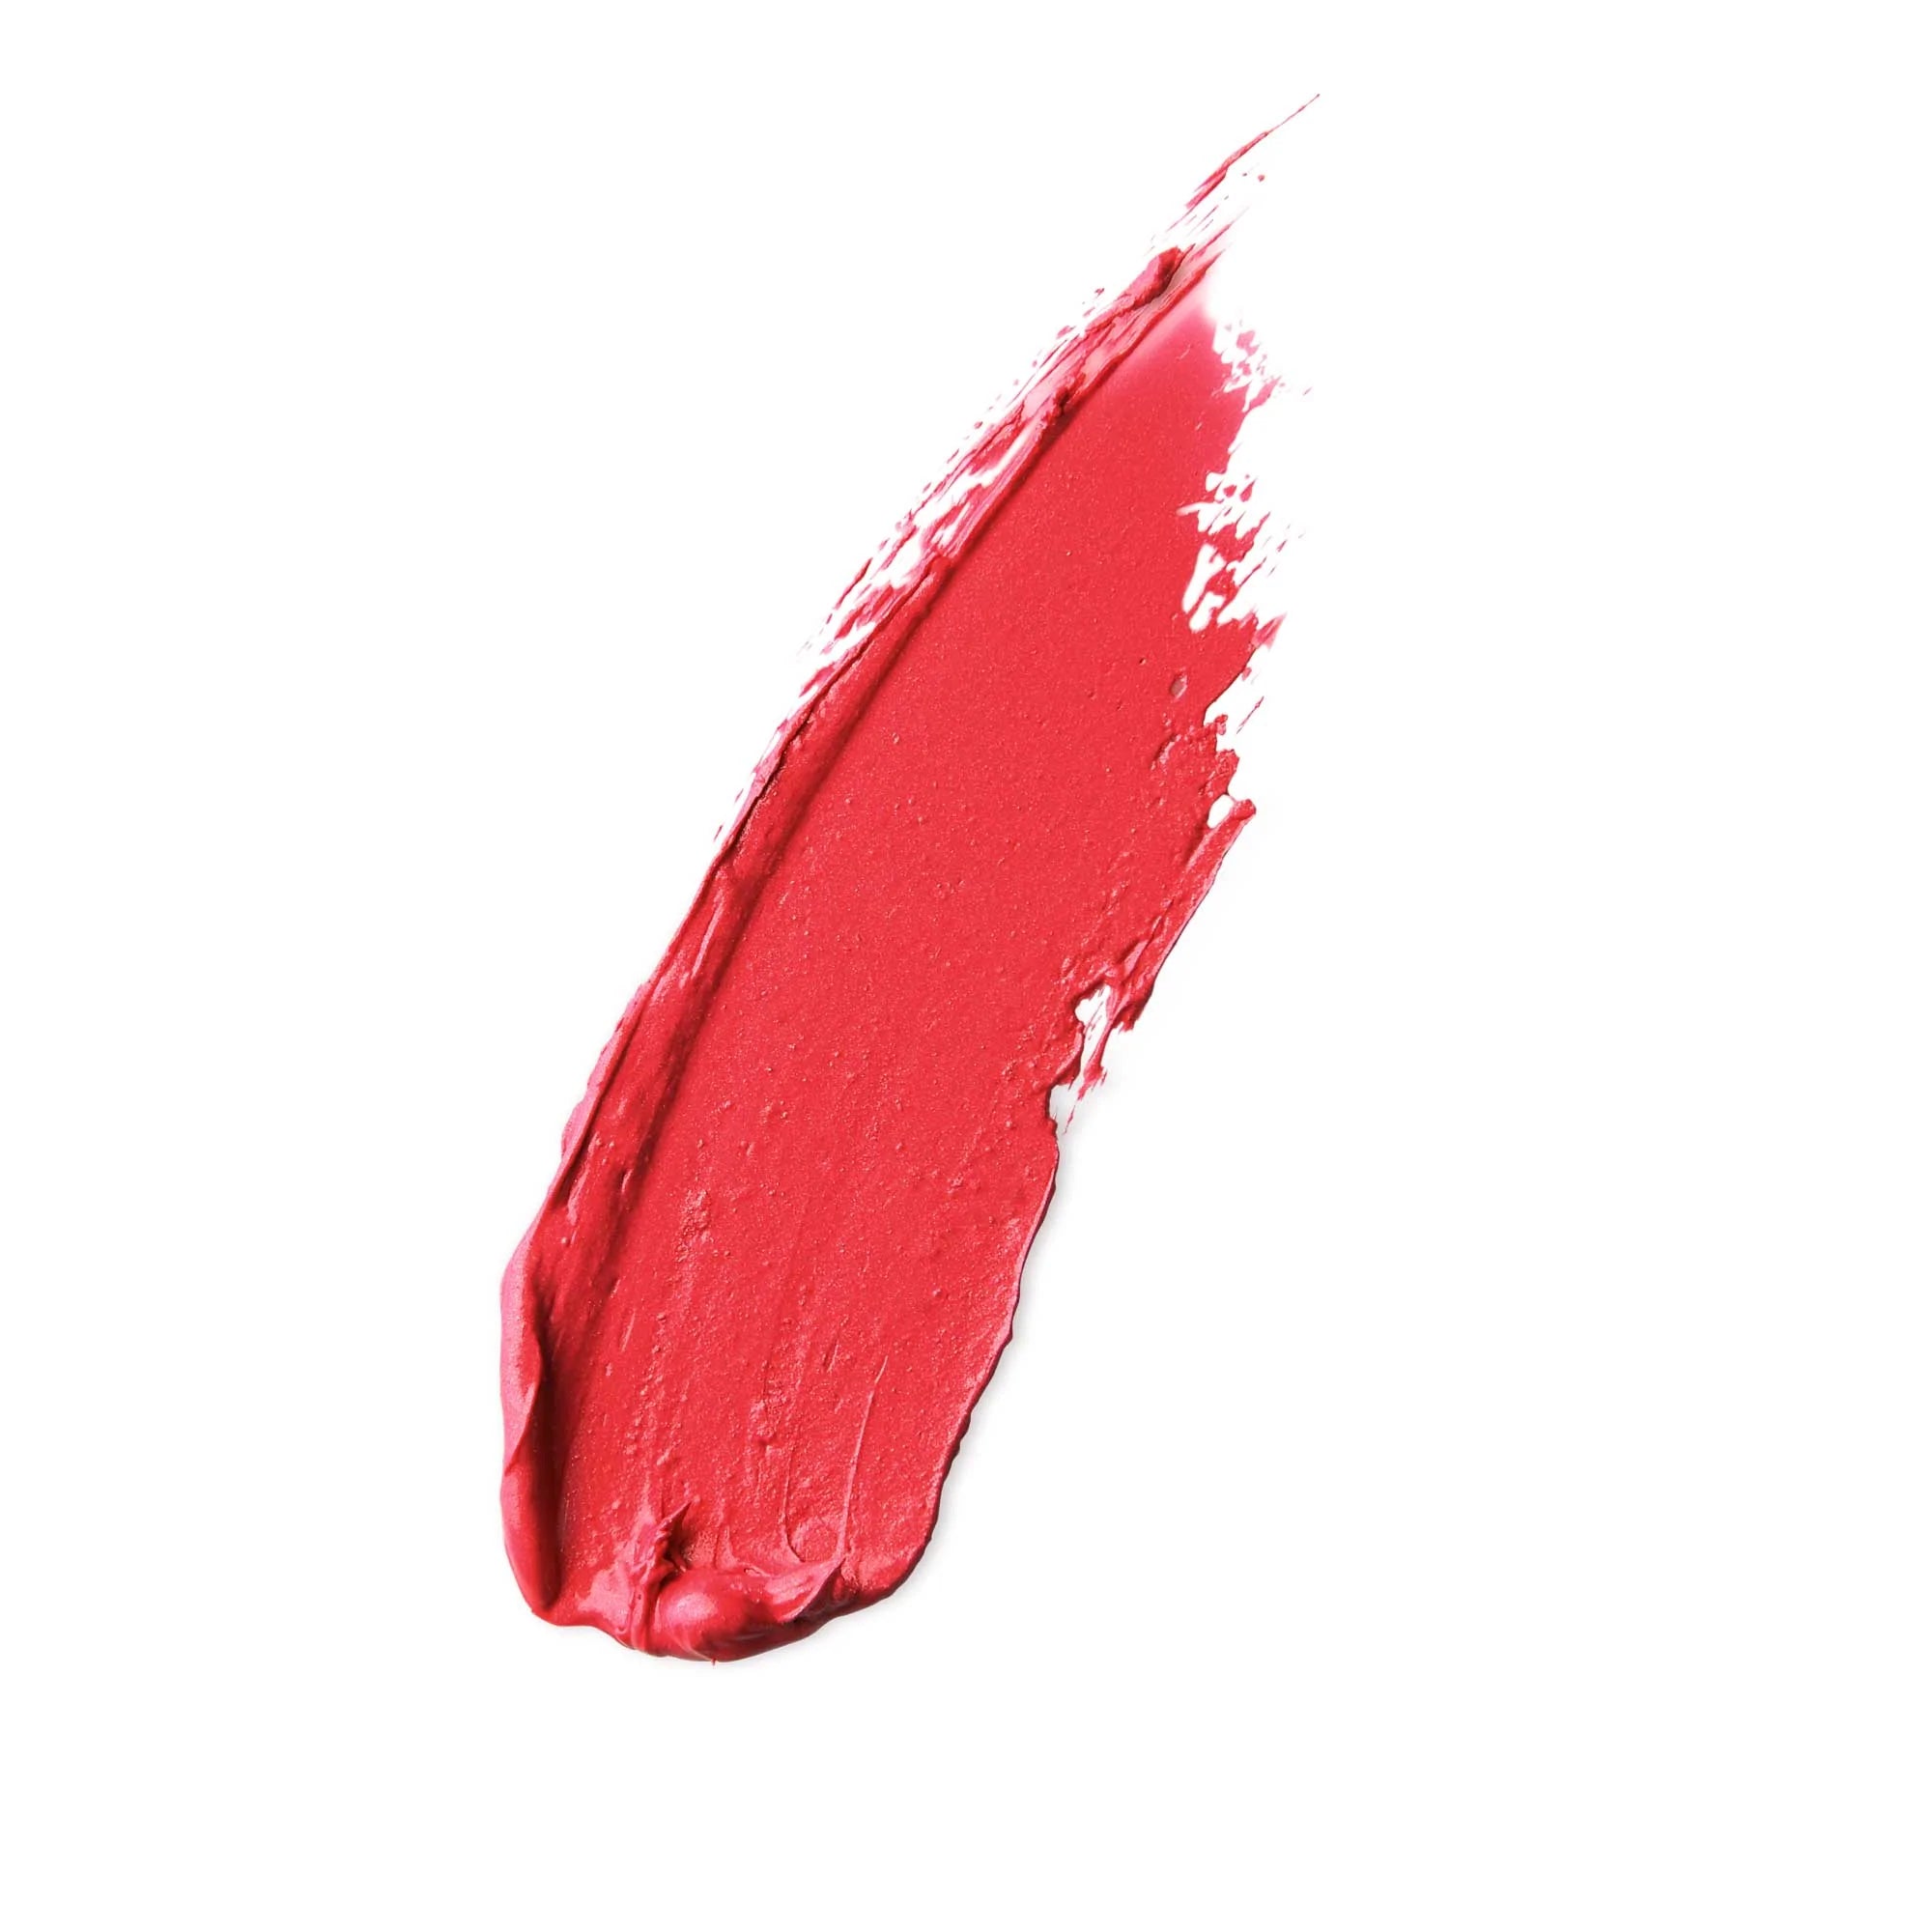 Antipodes Remarkably Red Moisture-Boost Natural Lipstick 4g-The Living Co.